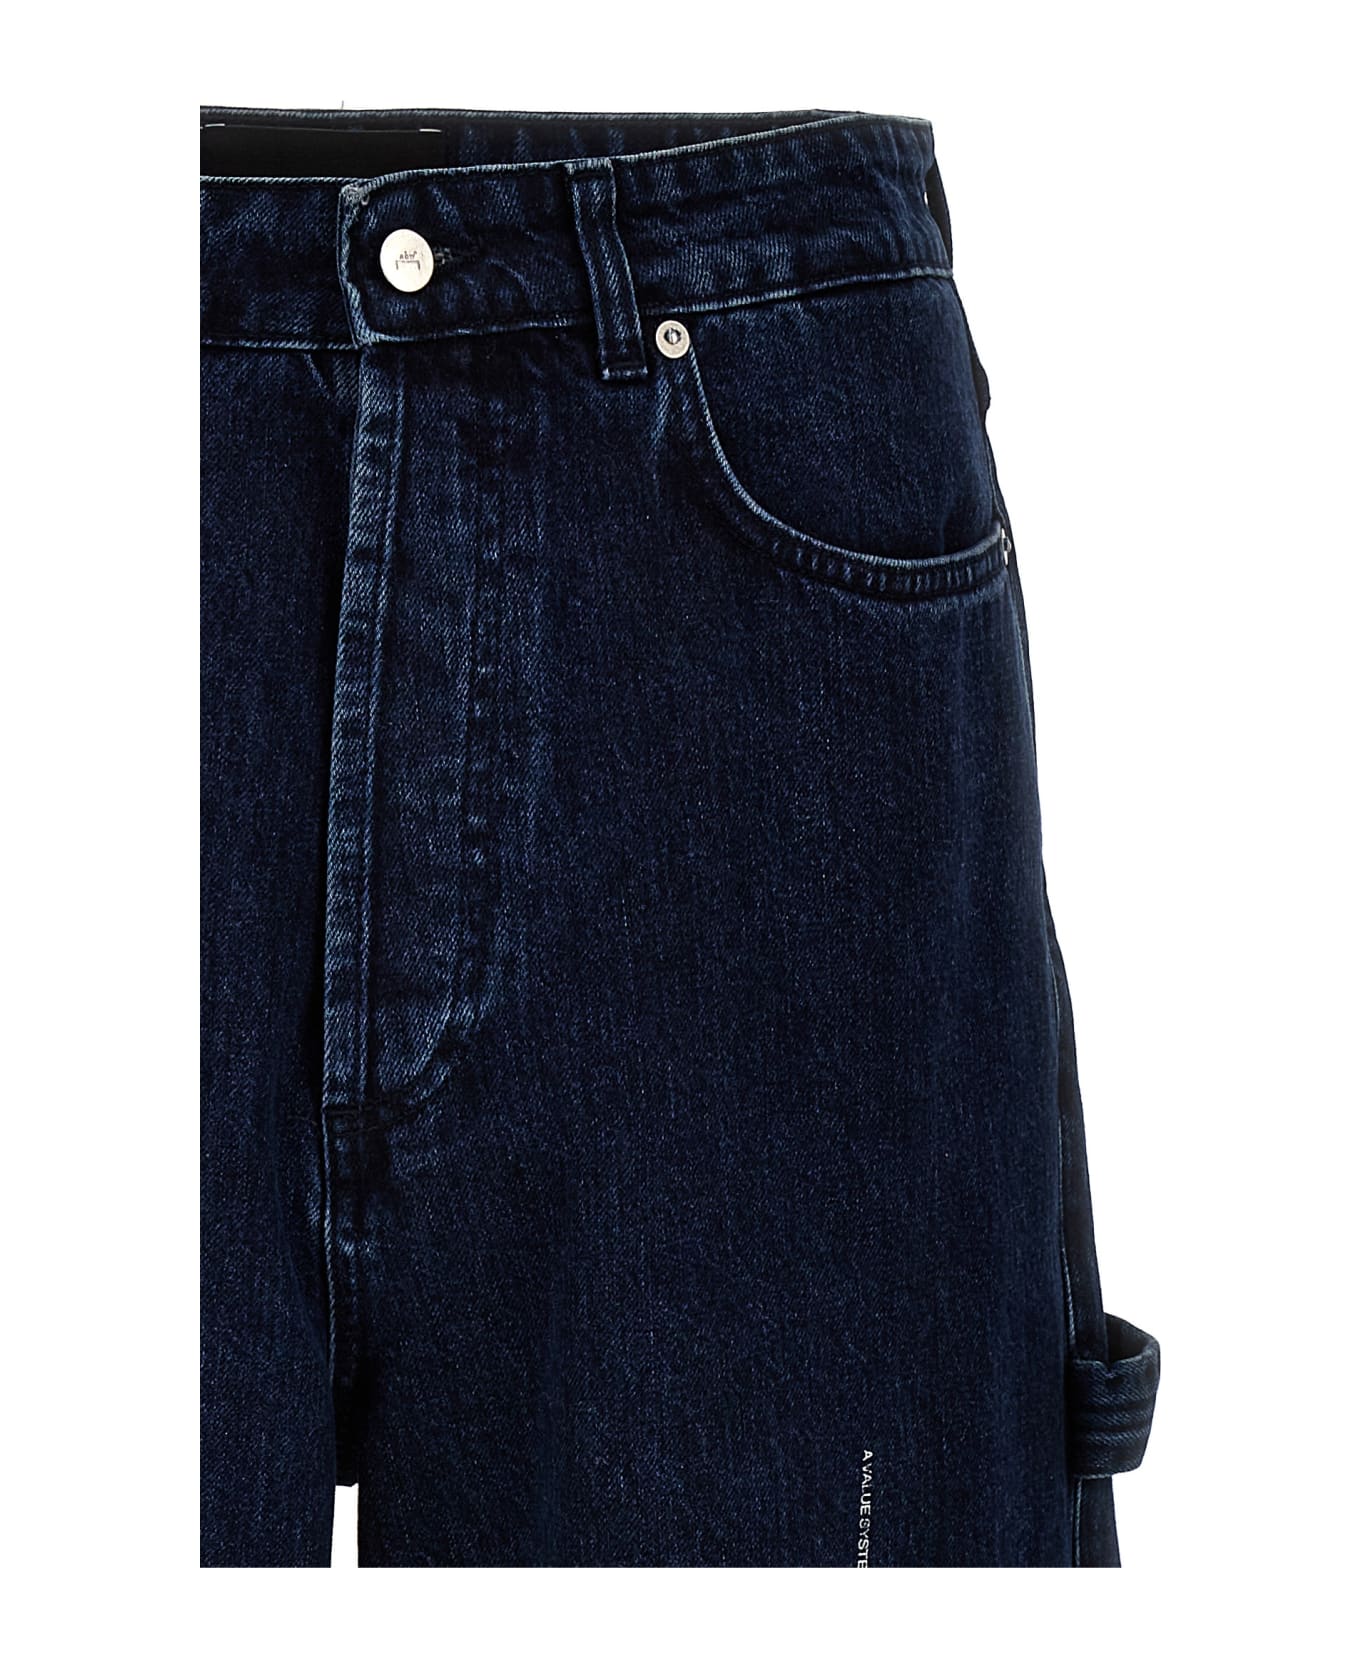 A-COLD-WALL 'discourse' Jeans - Blue